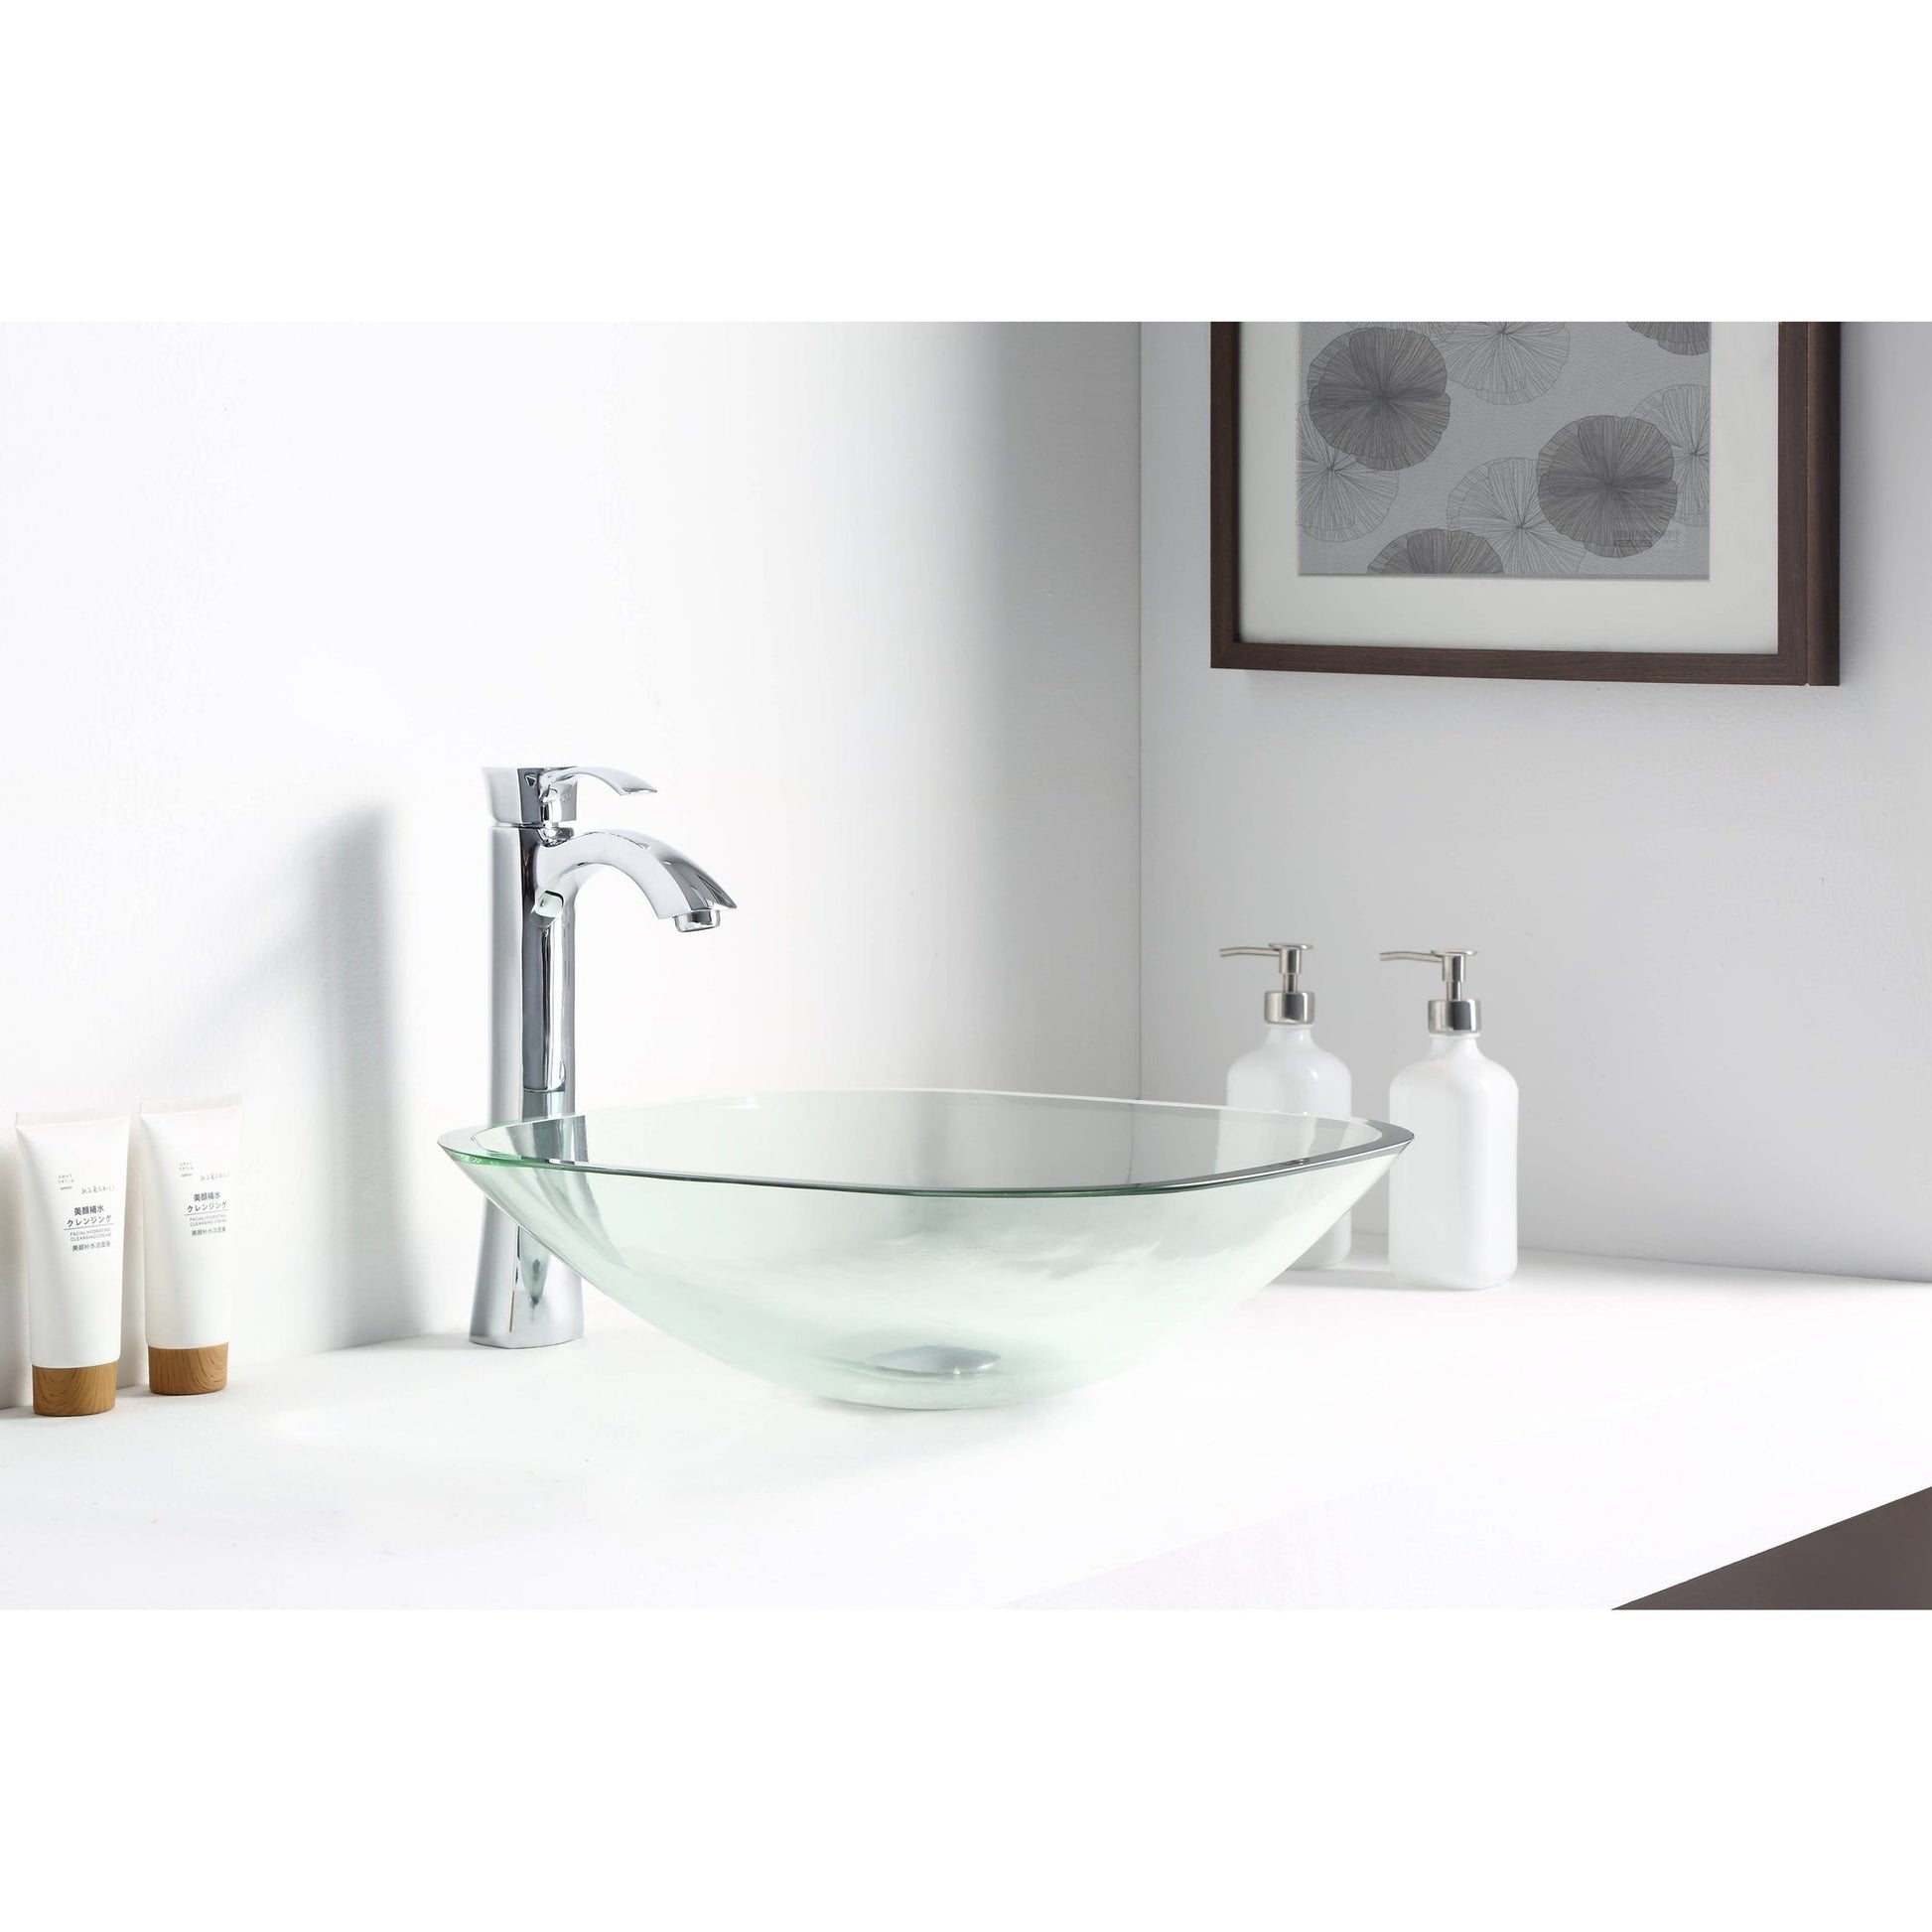 ANZZI Cadenza Series 17" x 17" Square Shape Lustrous Clear Deco-Glass Vessel Sink With Polished Chrome Pop-Up Drain